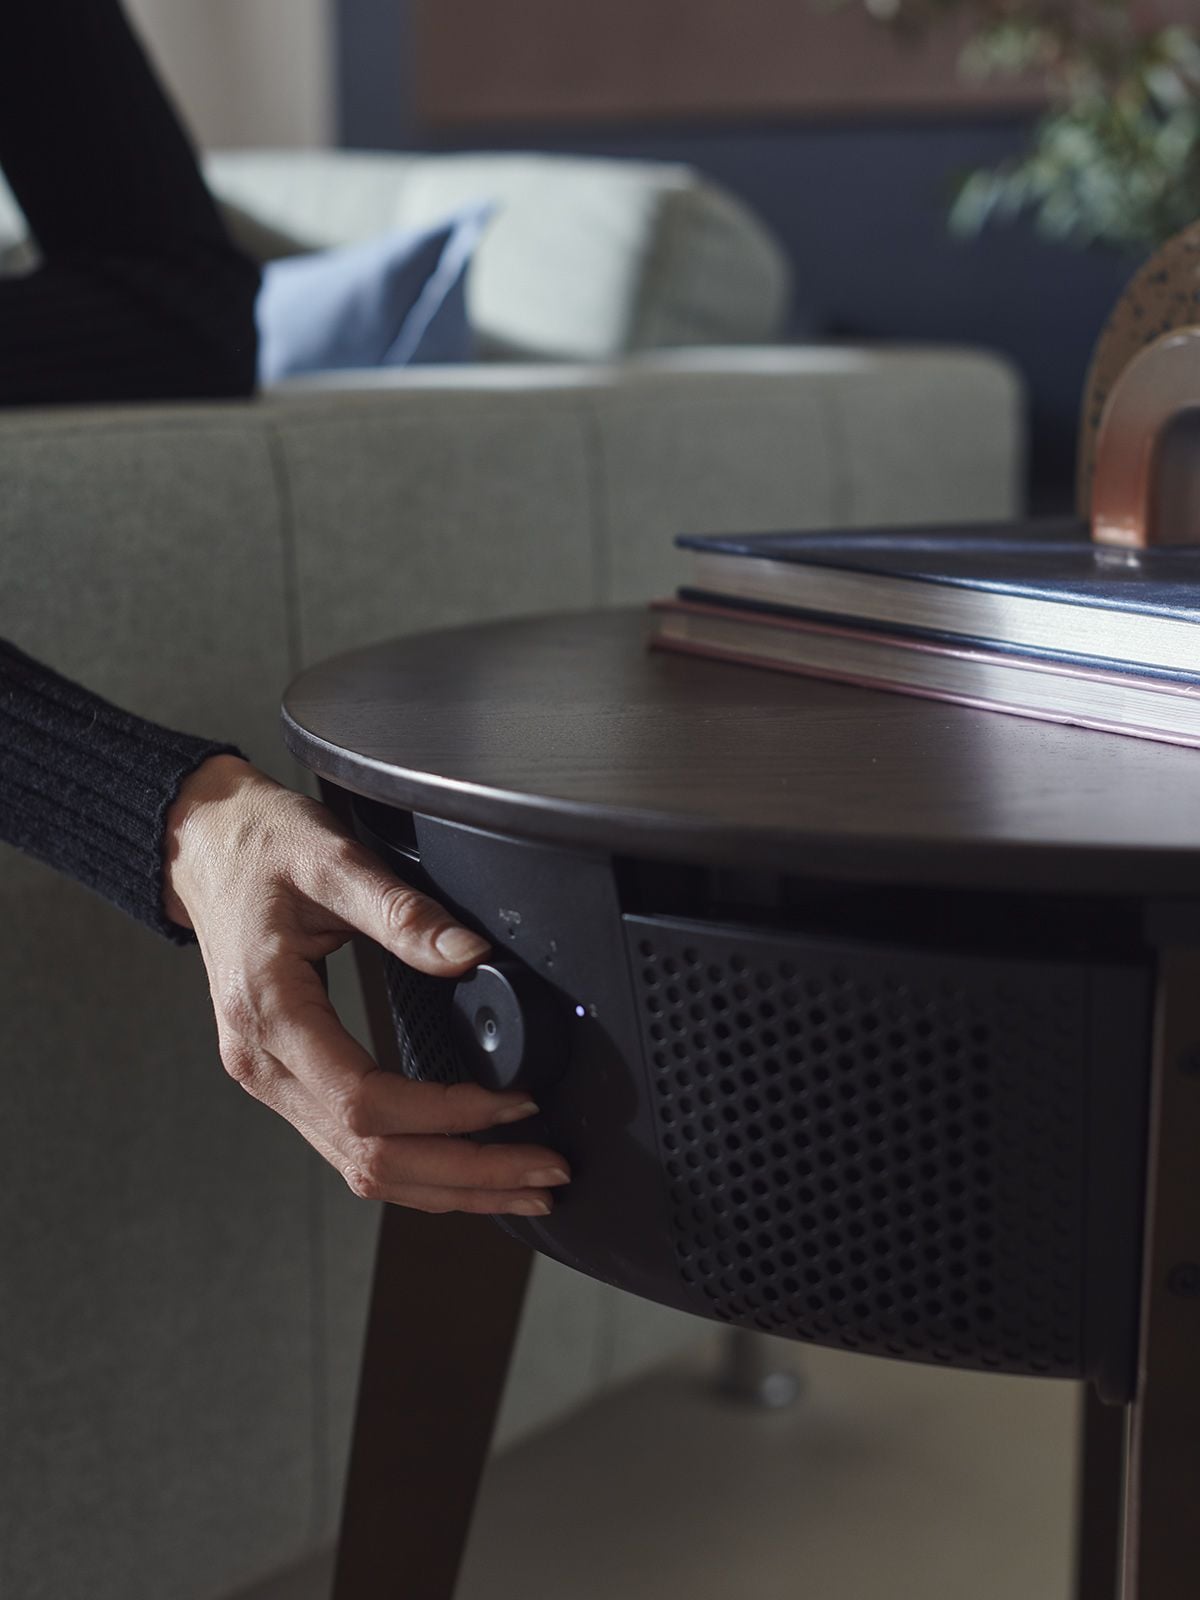 Even without the smart tech features, IKEA's new STRAKVIND air purifying table can be adjusted manually.